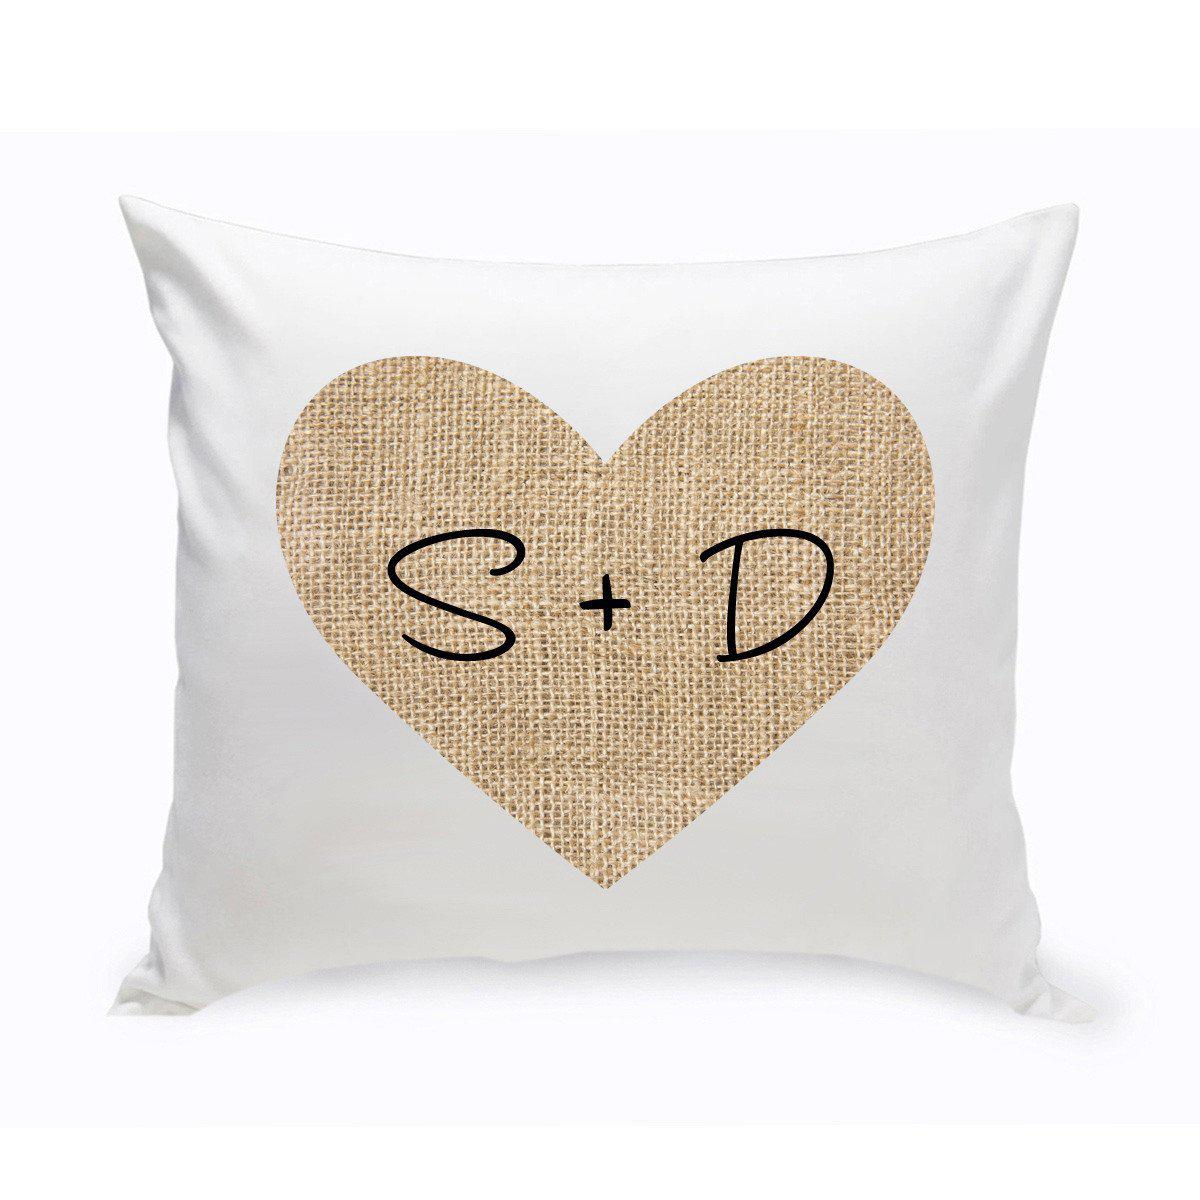 Personalized Couples Throw Pillows - Burlap Heart